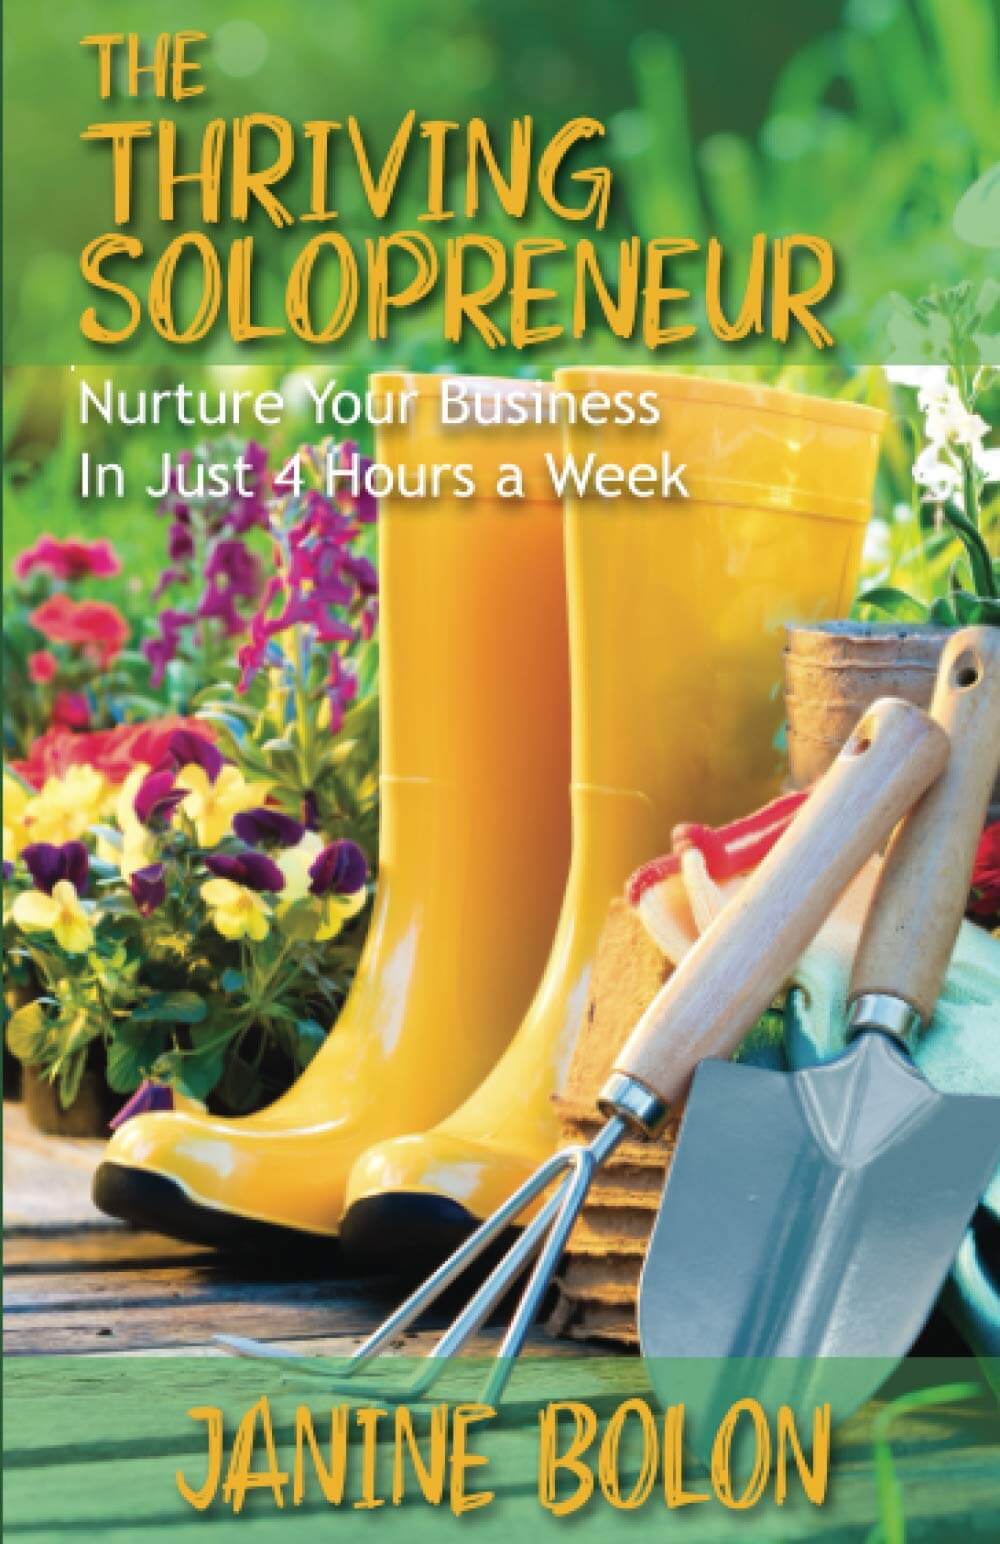 A picture of the book, "The Thriving Solopreneur".